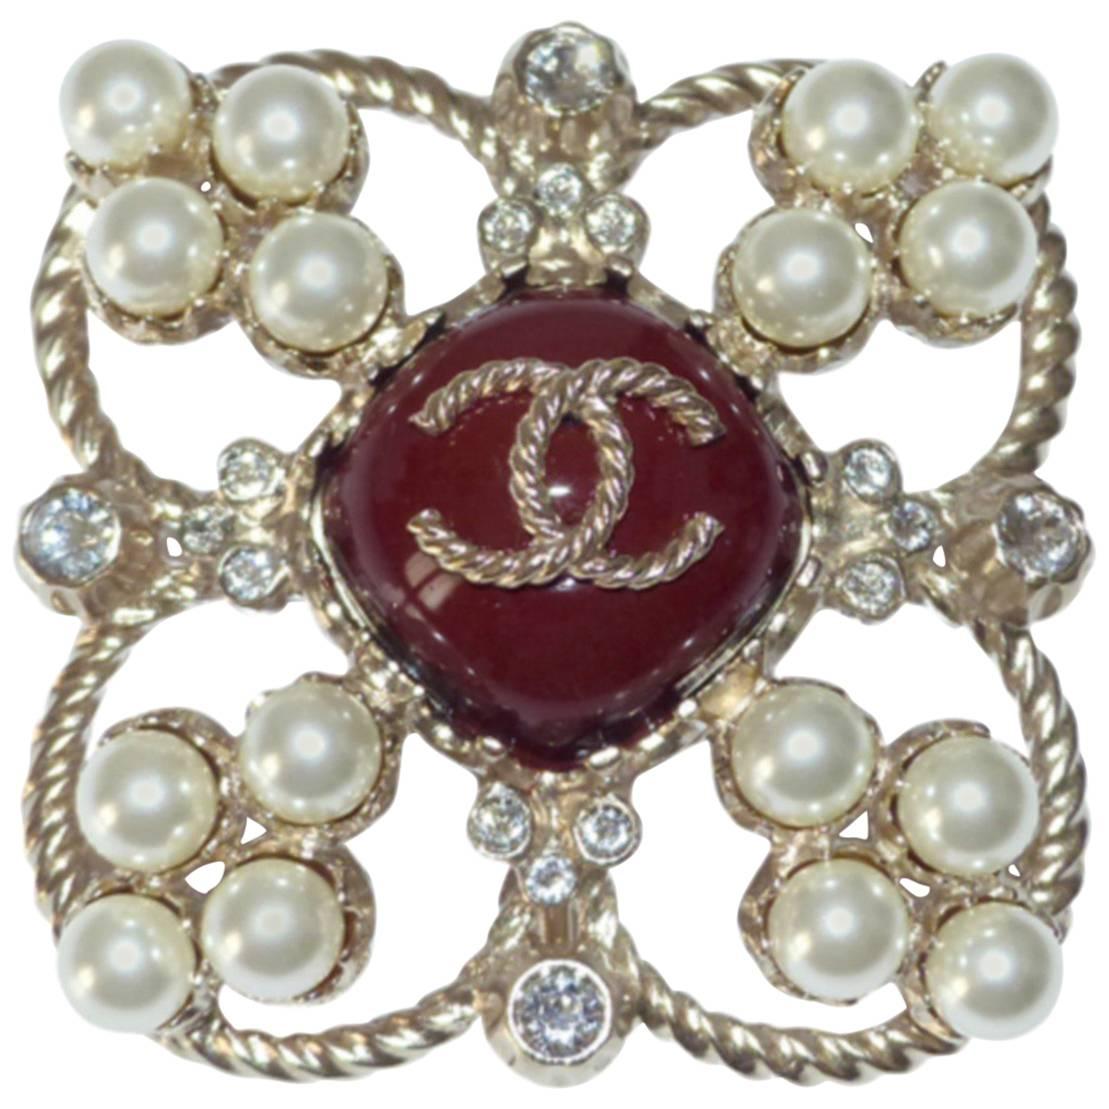 MA-GNI-FIC Chanel Brooch Paris Edimbourg Pearls and CC logo Excellente  Condition at 1stDibs